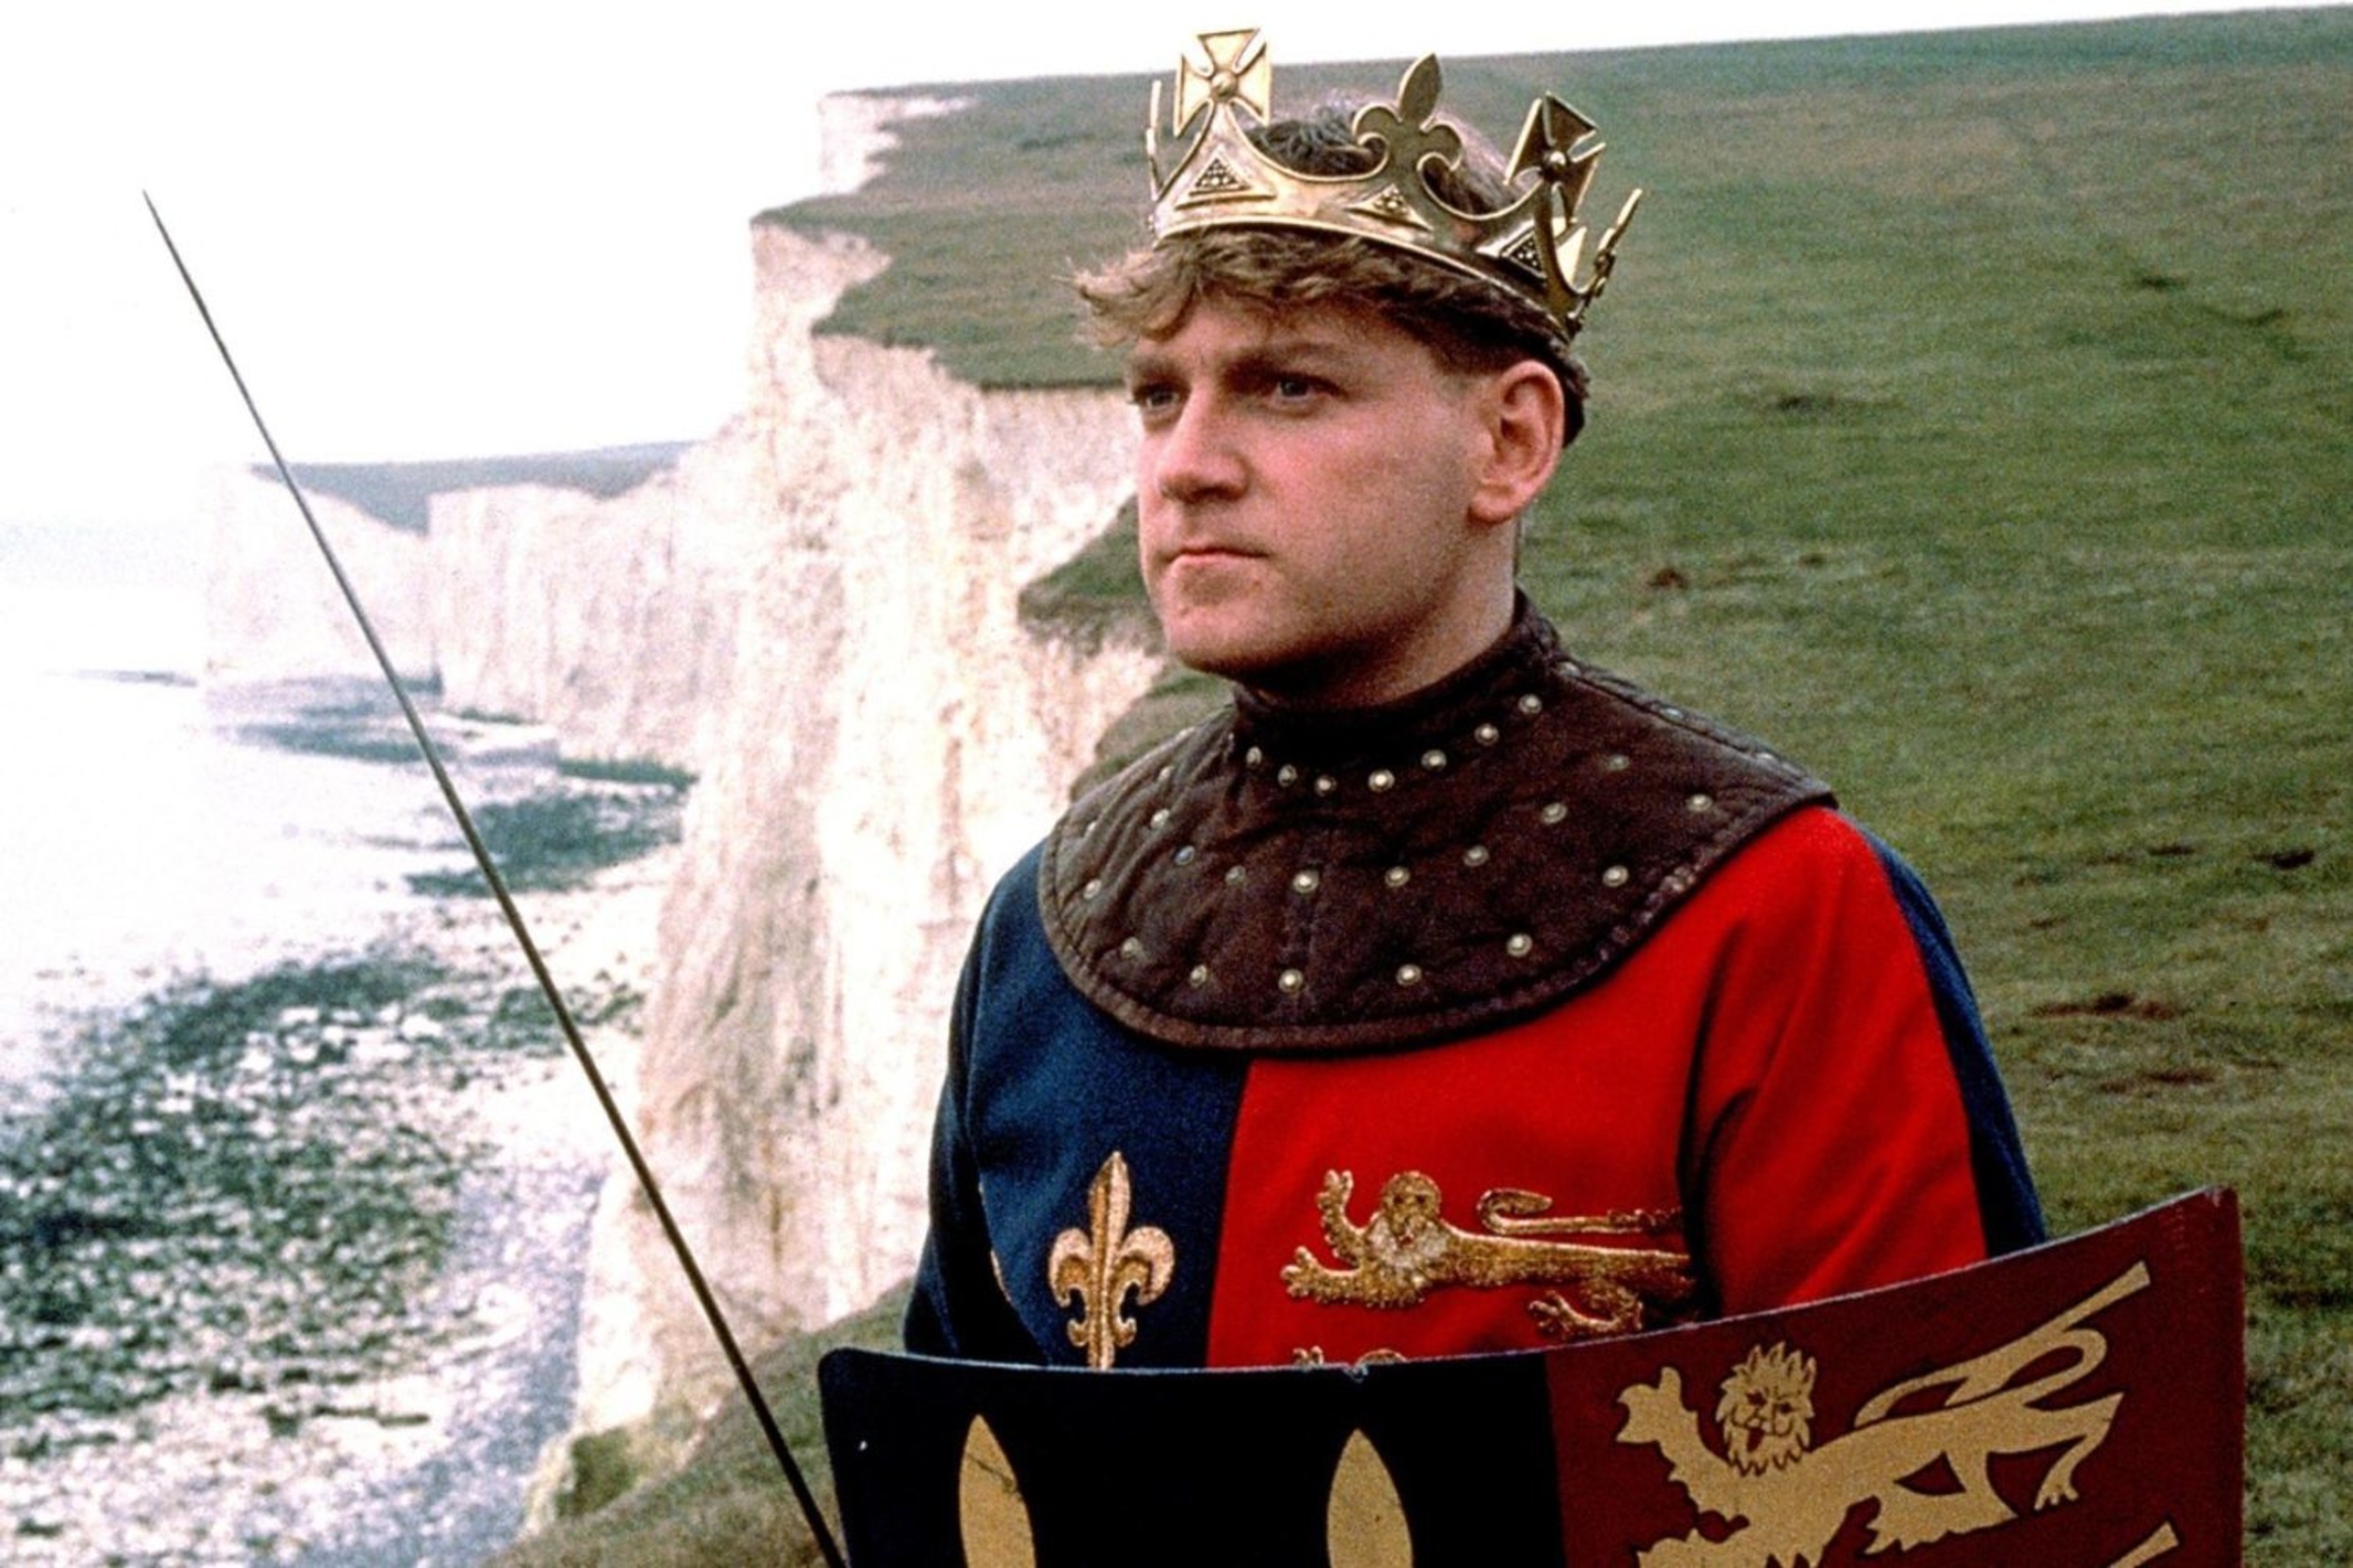 <p>The film that Kenneth Branagh built his career on. He starred, wrote, and directed this adaptation of a Shakespeare play. He had never directed before but was nominated for Best Director and Best Actor. This basically let Branagh adapt Shakespeare plays until the cows came home, which he happily did.</p>